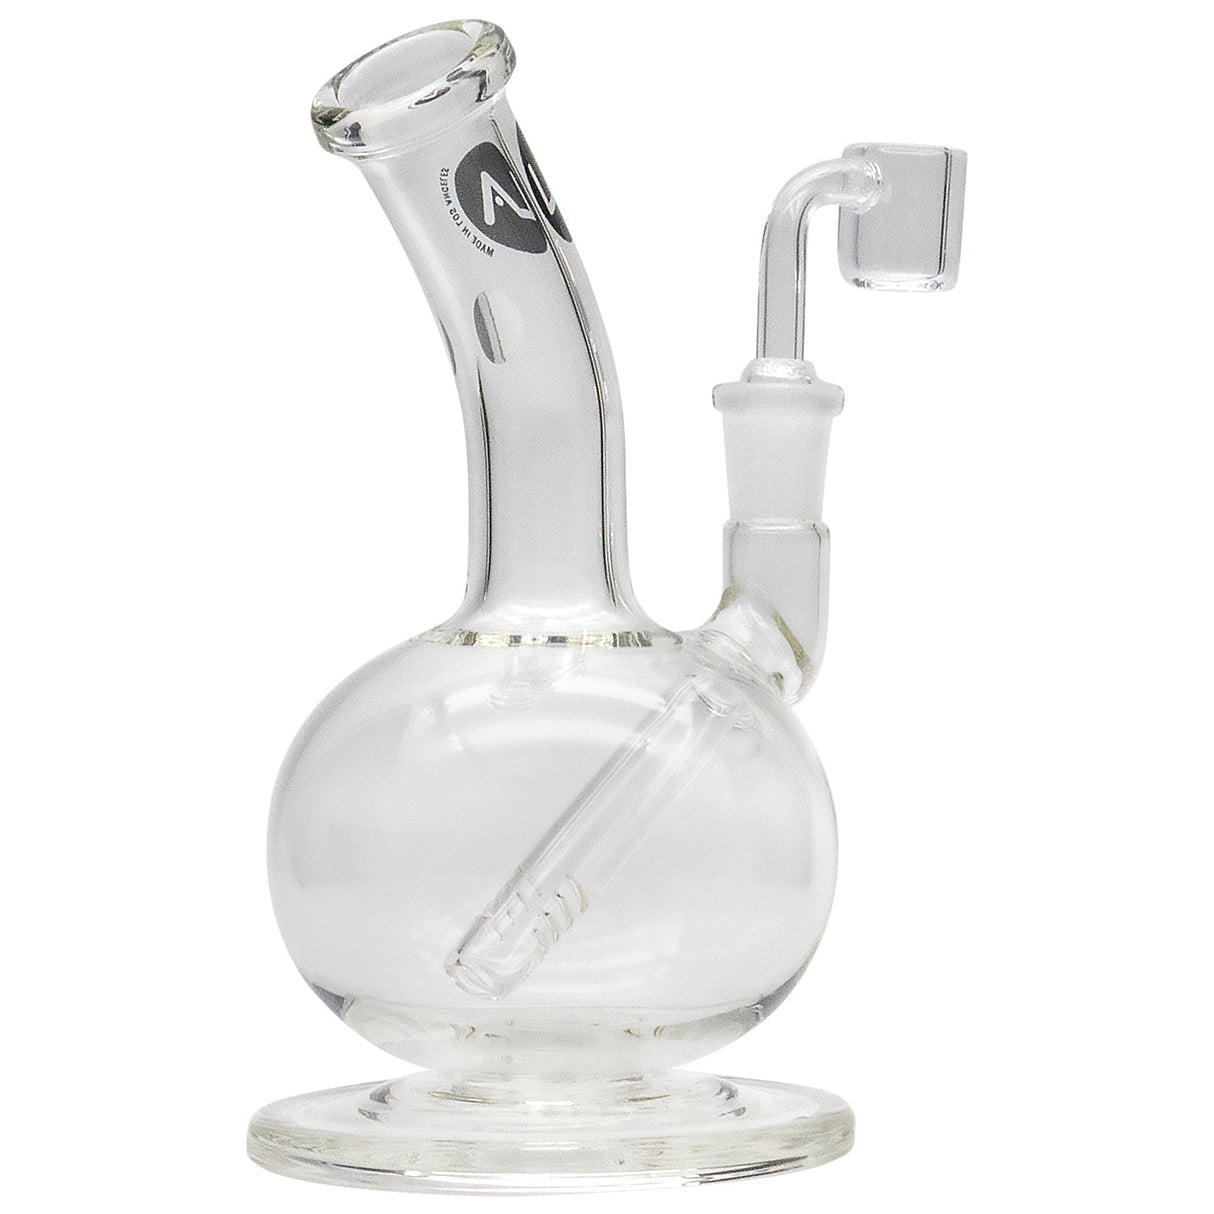 LA Pipes Bubble Base Concentrate Rig with Banger Hanger Design, 6" Tall, 14mm Female Joint, Borosilicate Glass